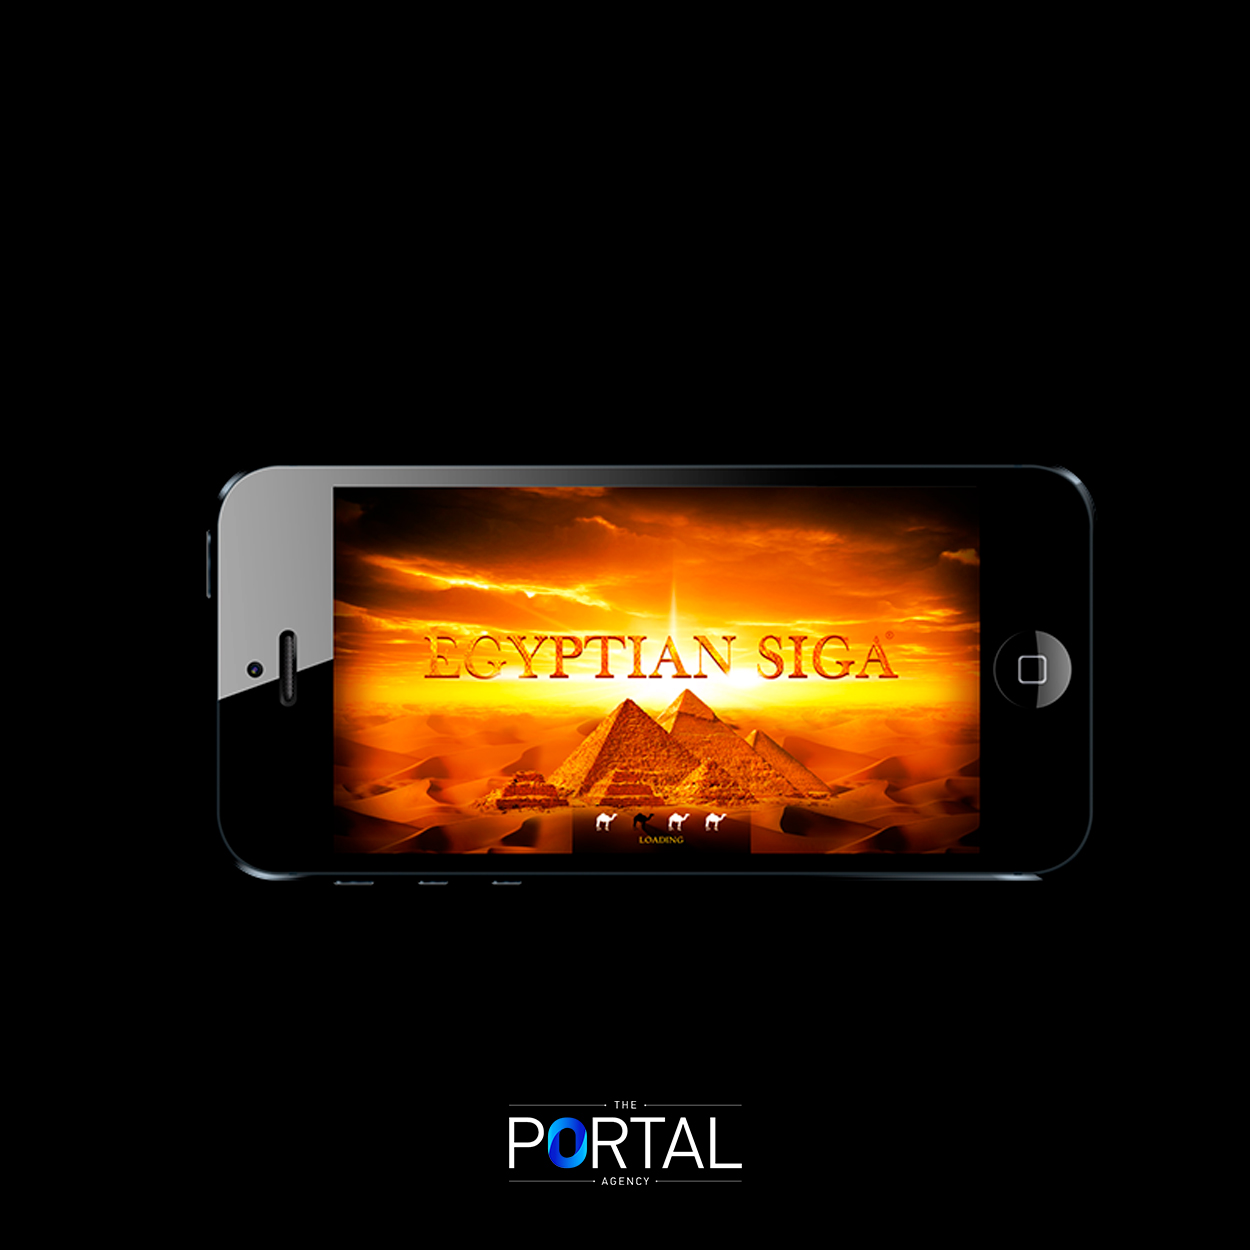 https://theportalagency.com/project/egyptian-siga-mobile-app/